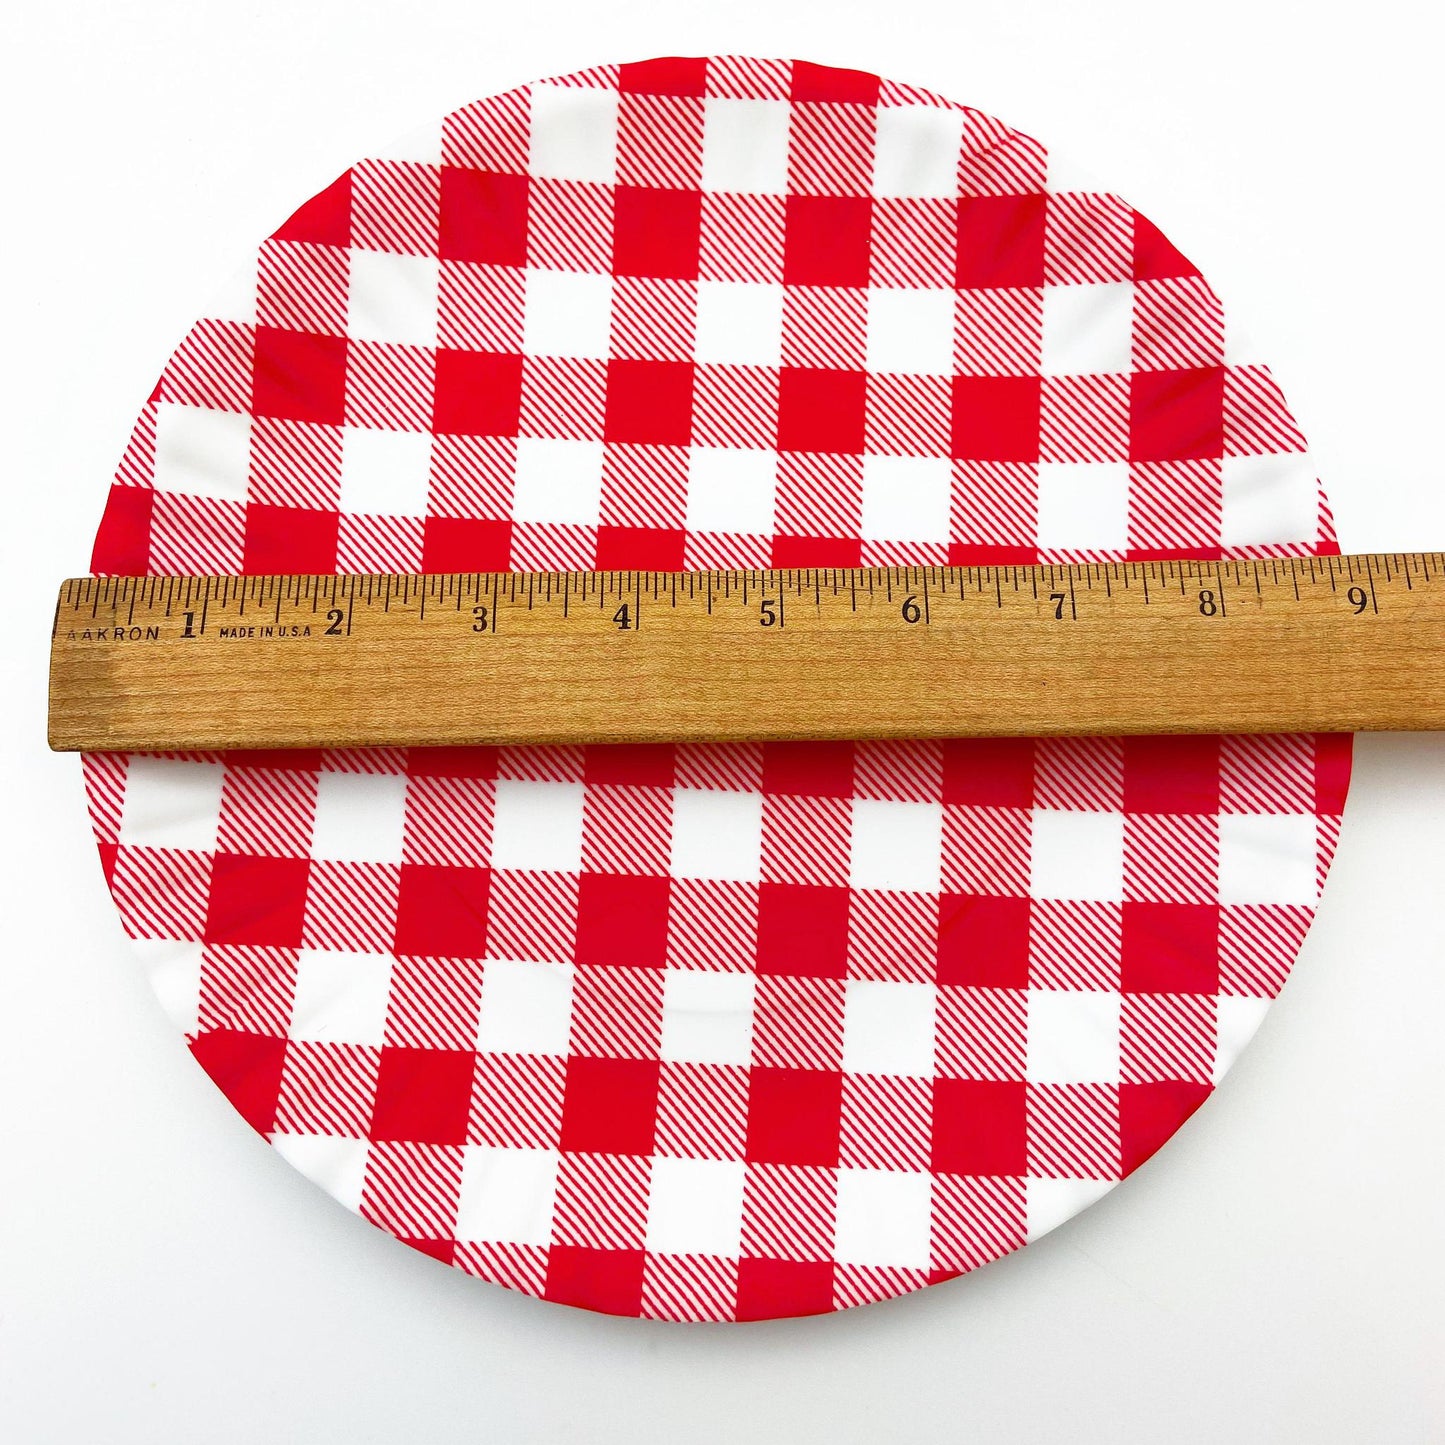 Plate - Melamine "Paper Plate" - Red Gingham